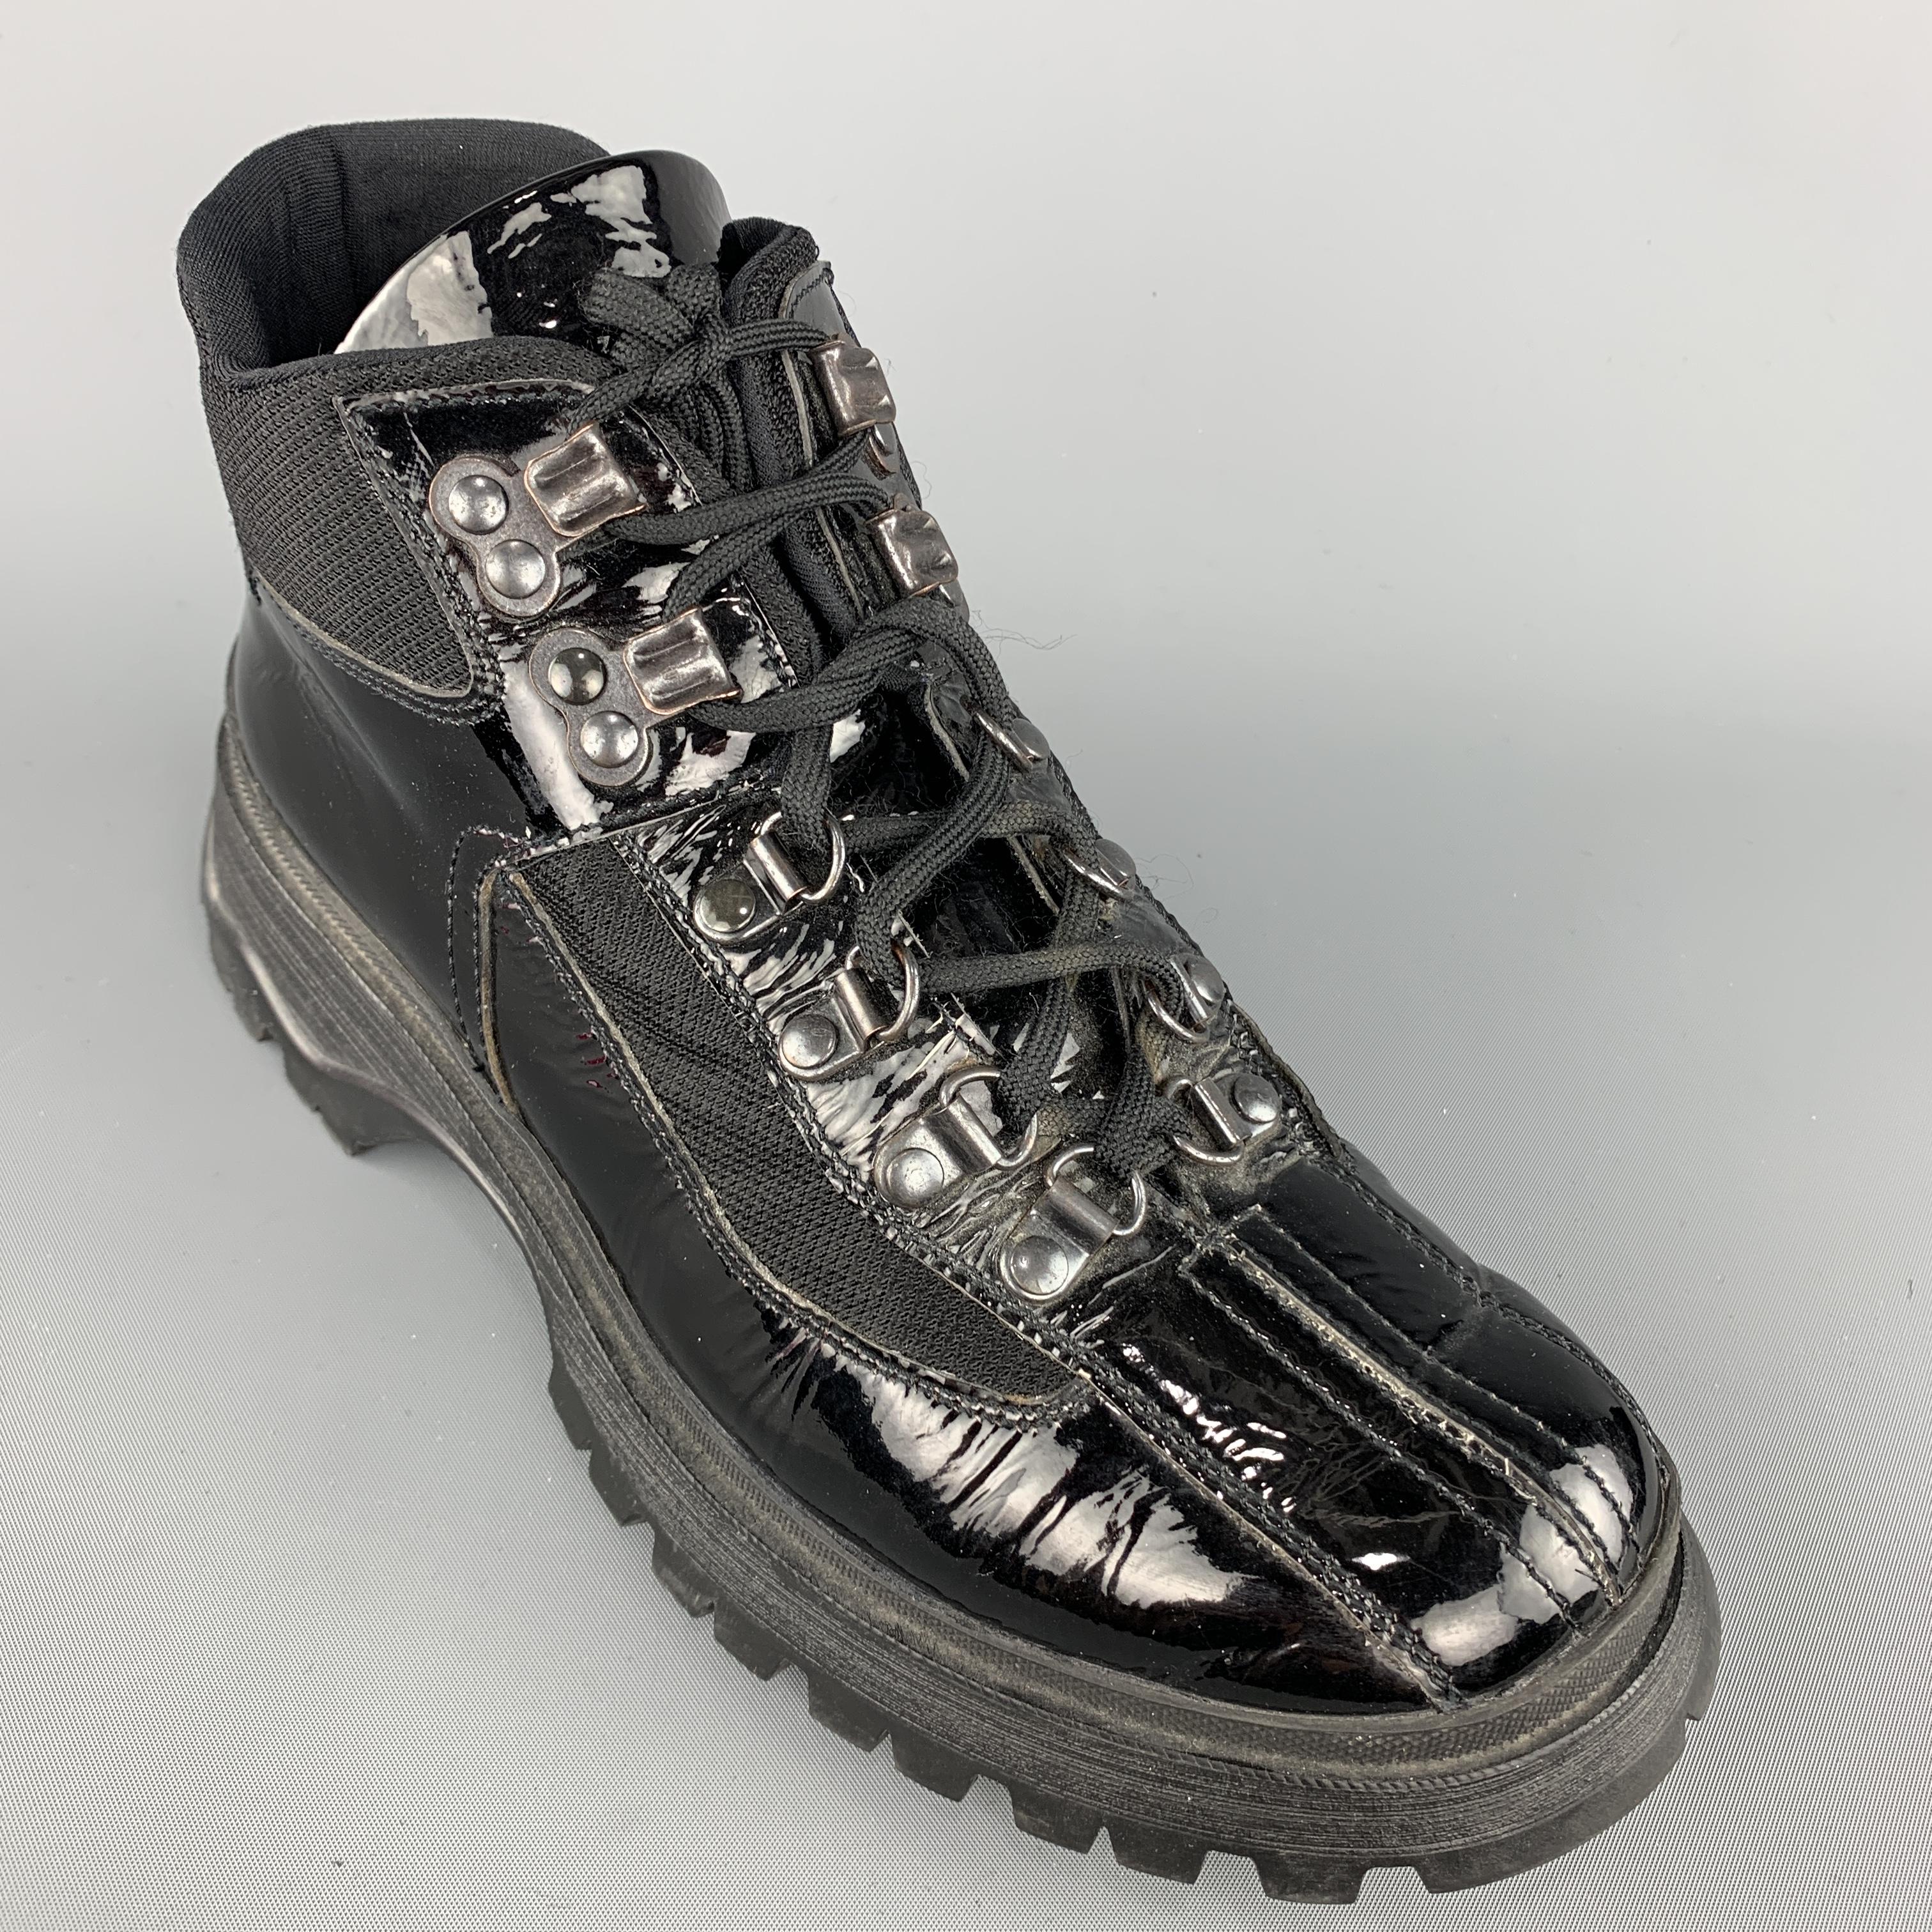 PRADA sneaker ankle boots come in black patent leather with nylon panels, ski hook lace up front, and chunky hiking sole. Made in Italy.
 
Very Good Pre-Owned Condition.
Marked: IT 37
 
Platform Sole: 1 in.